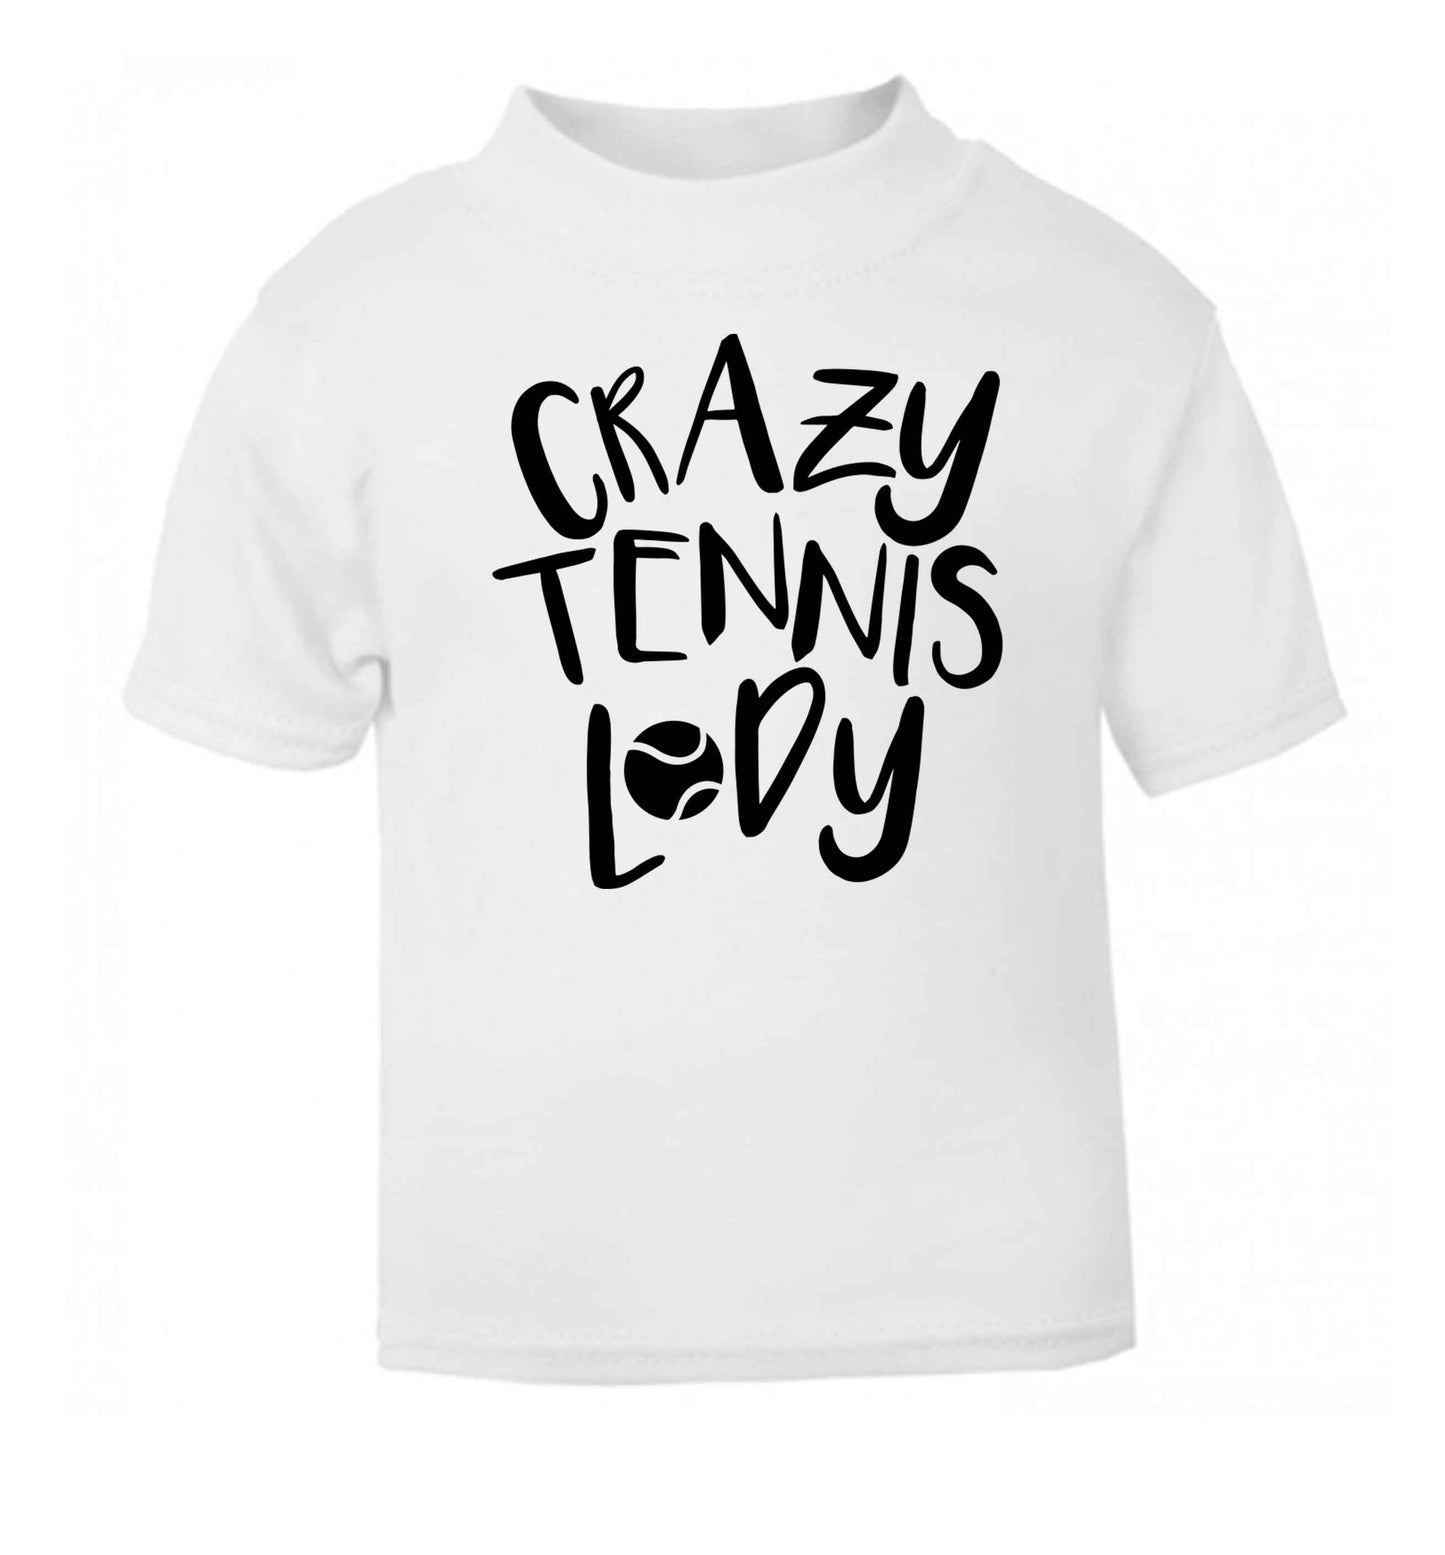 Crazy tennis lady white Baby Toddler Tshirt 2 Years